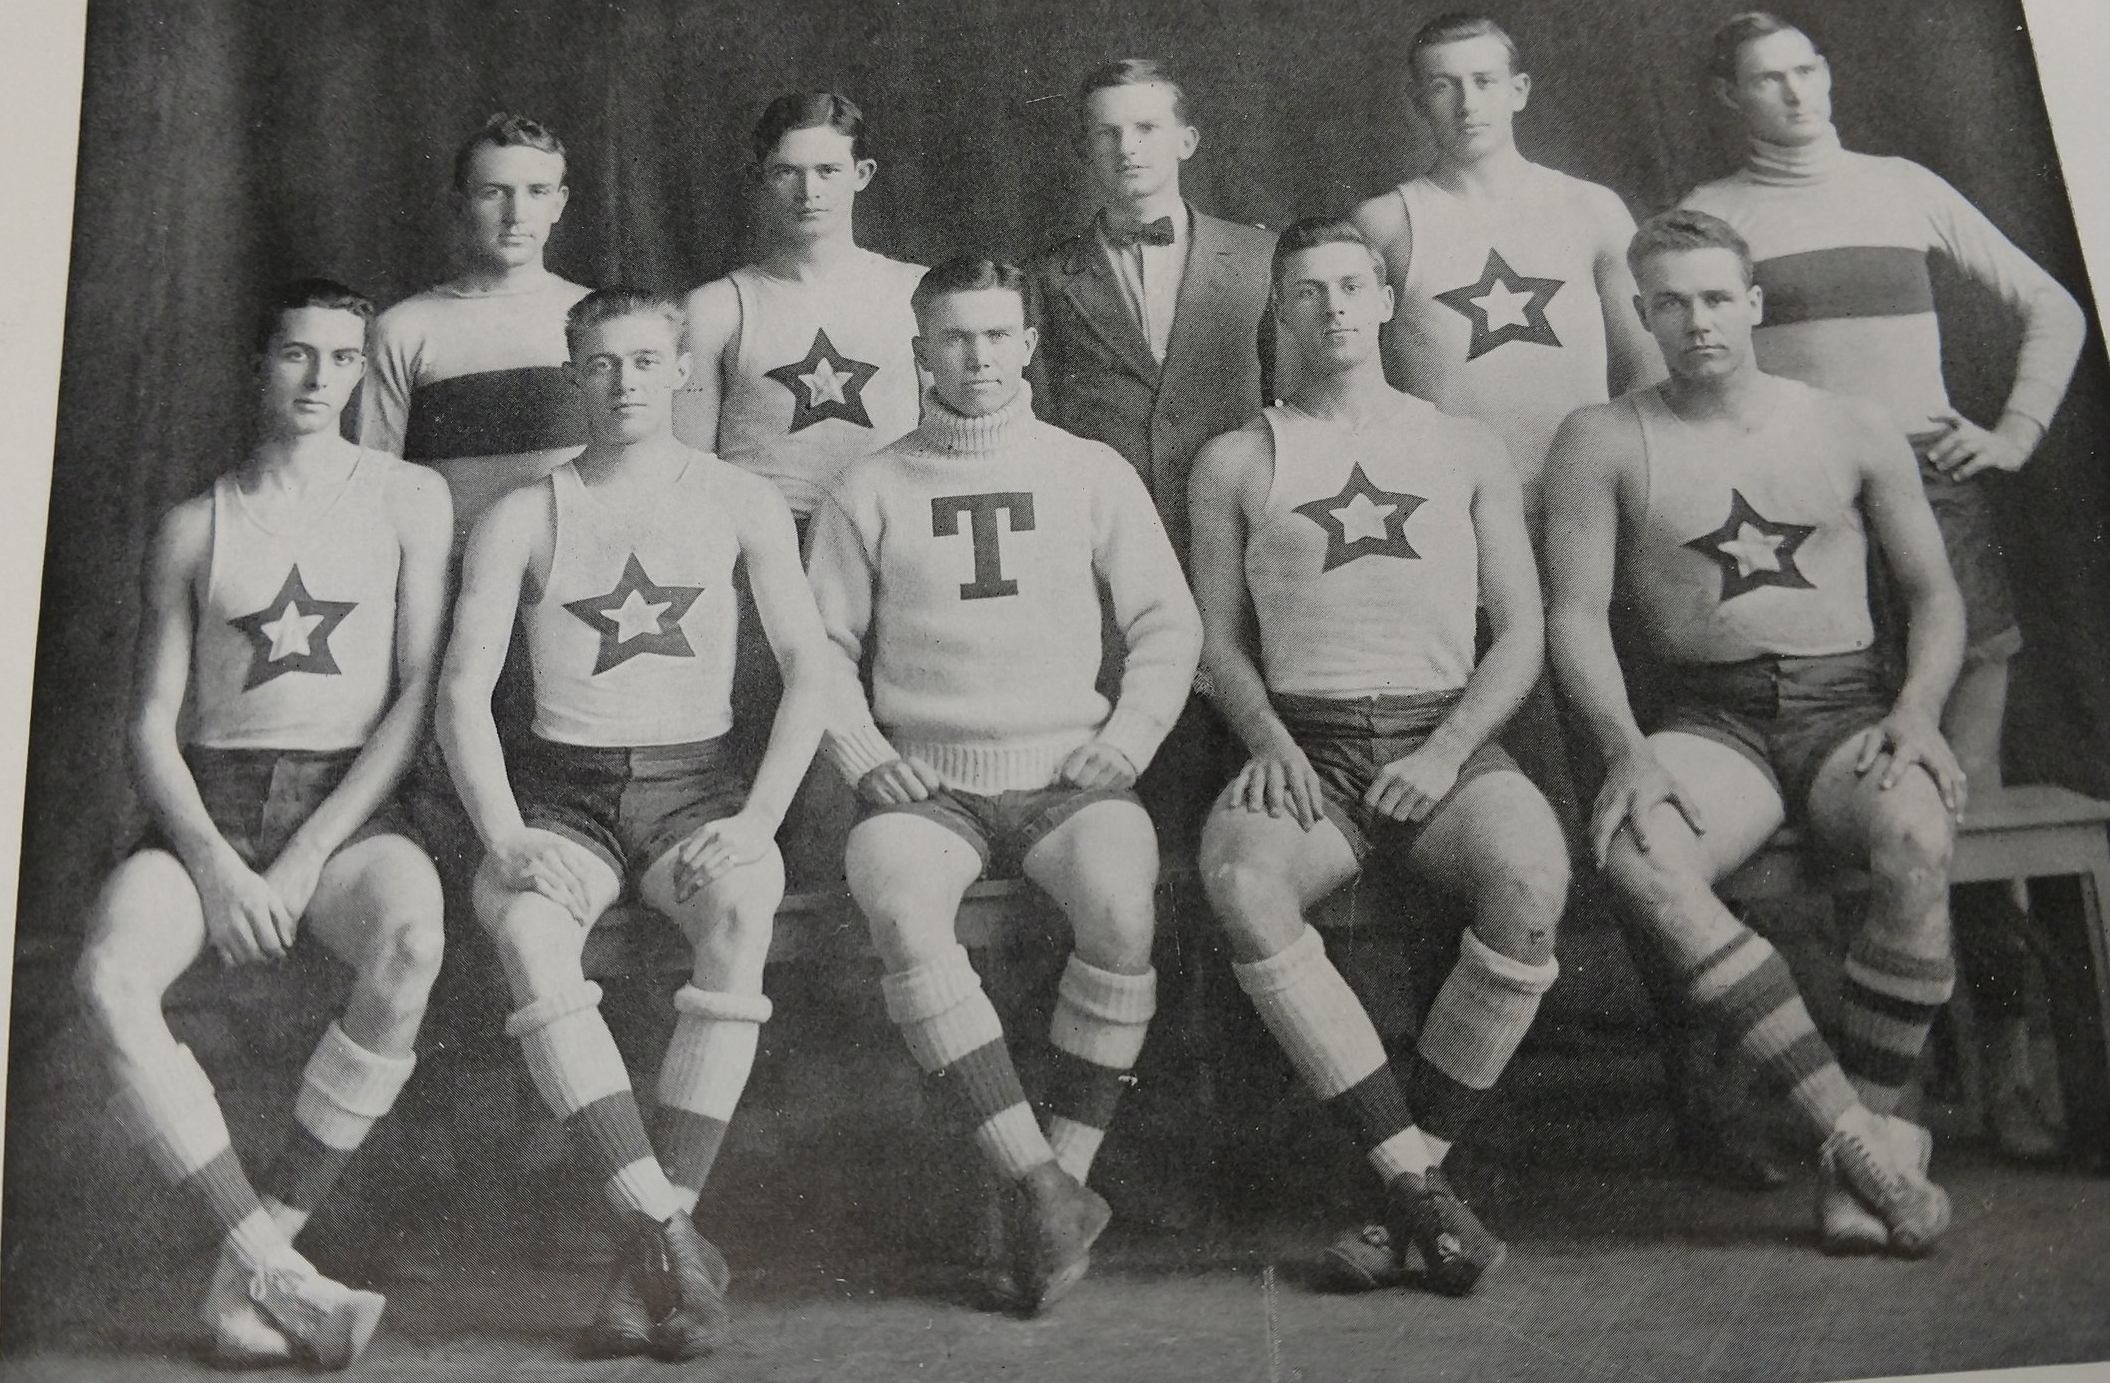 1910 The team still has financial issues and no gym facility for games and practice.